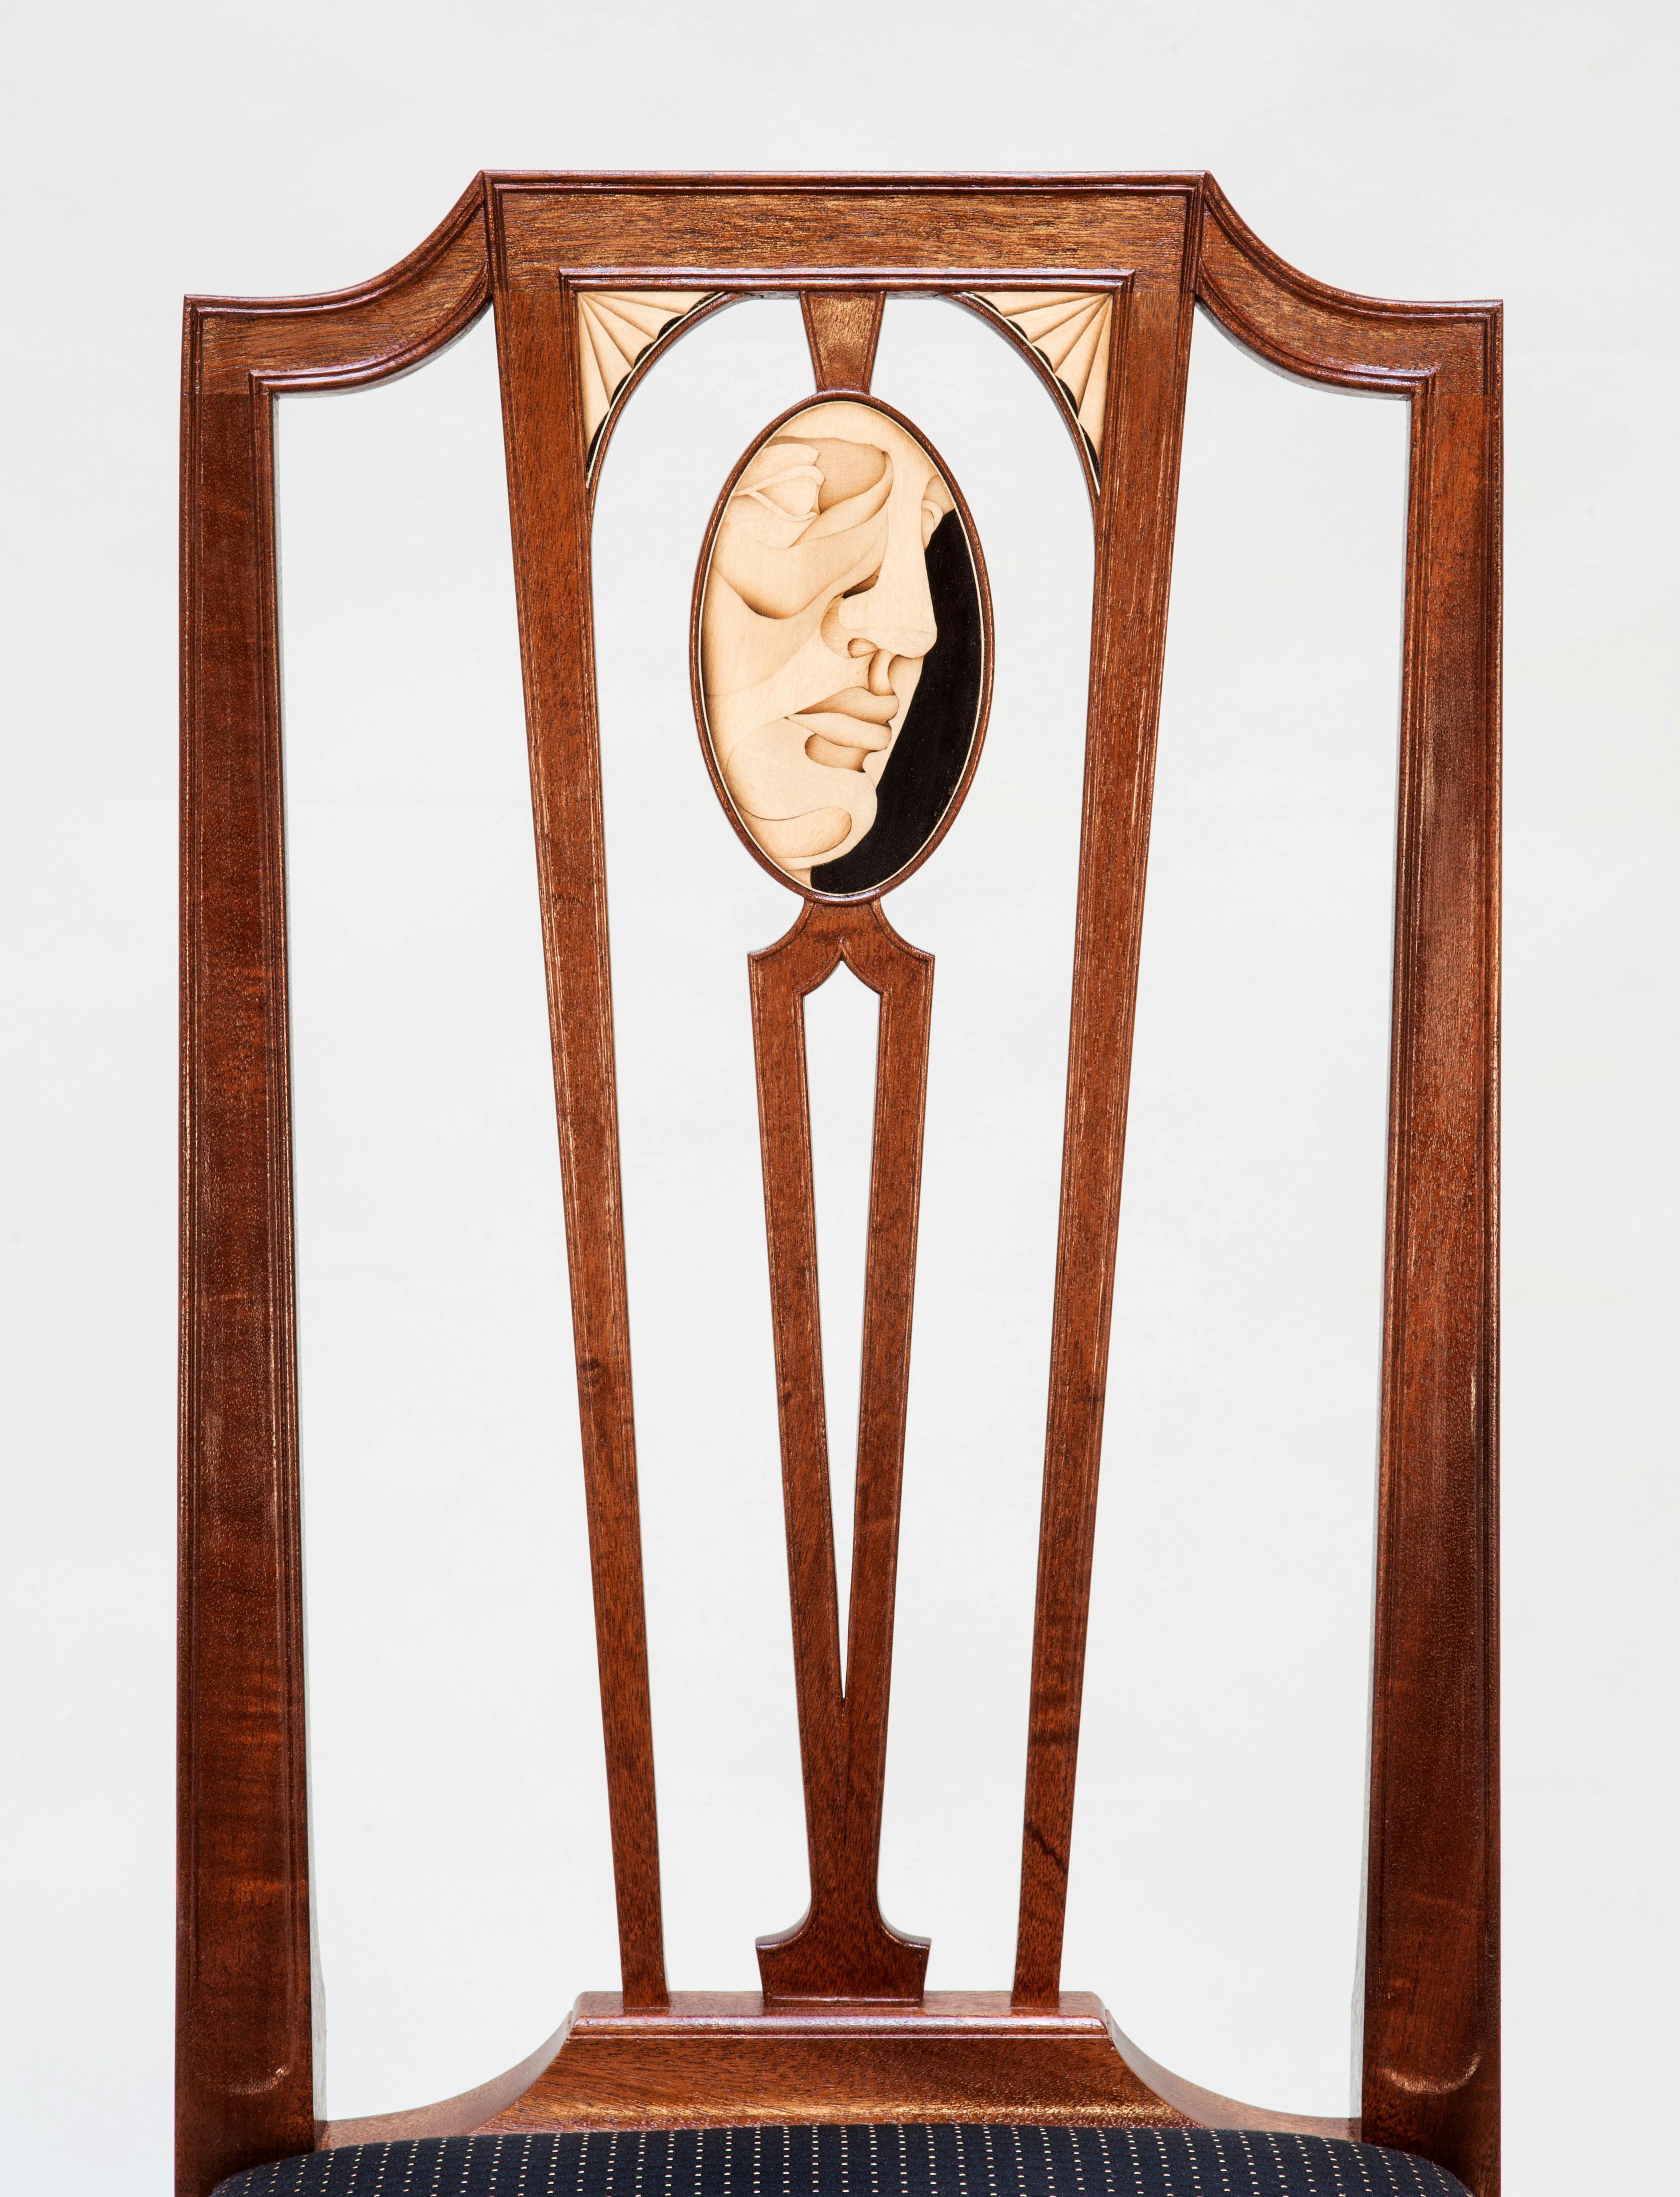 brown wooden chair back with the design of a face inlaid in an oval